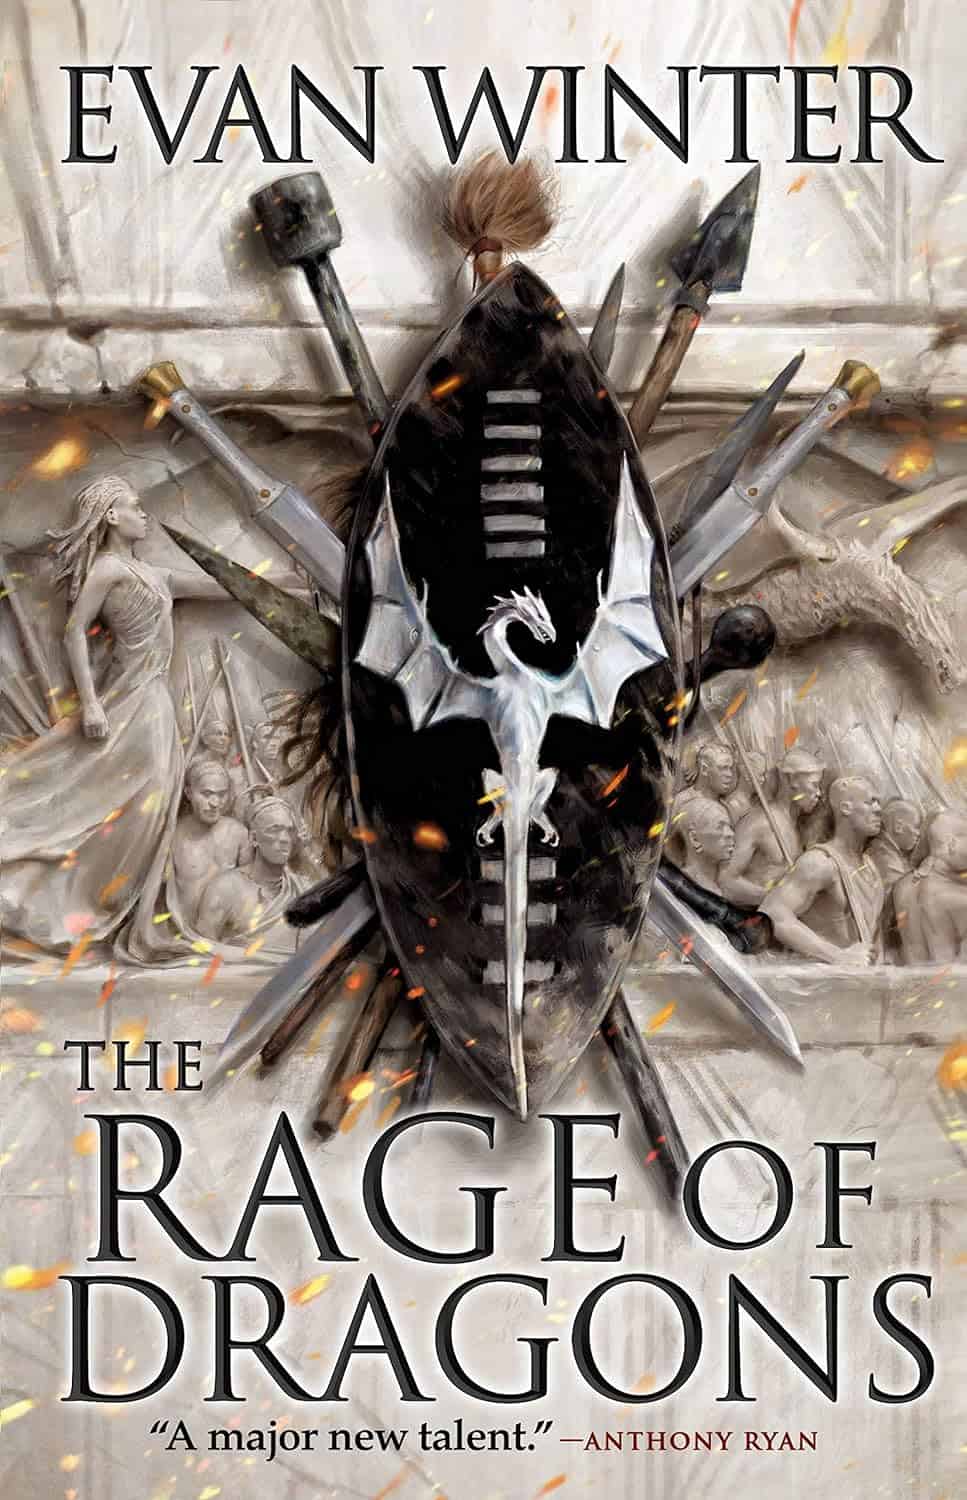 The Rage of Dragons, by Evan Winter